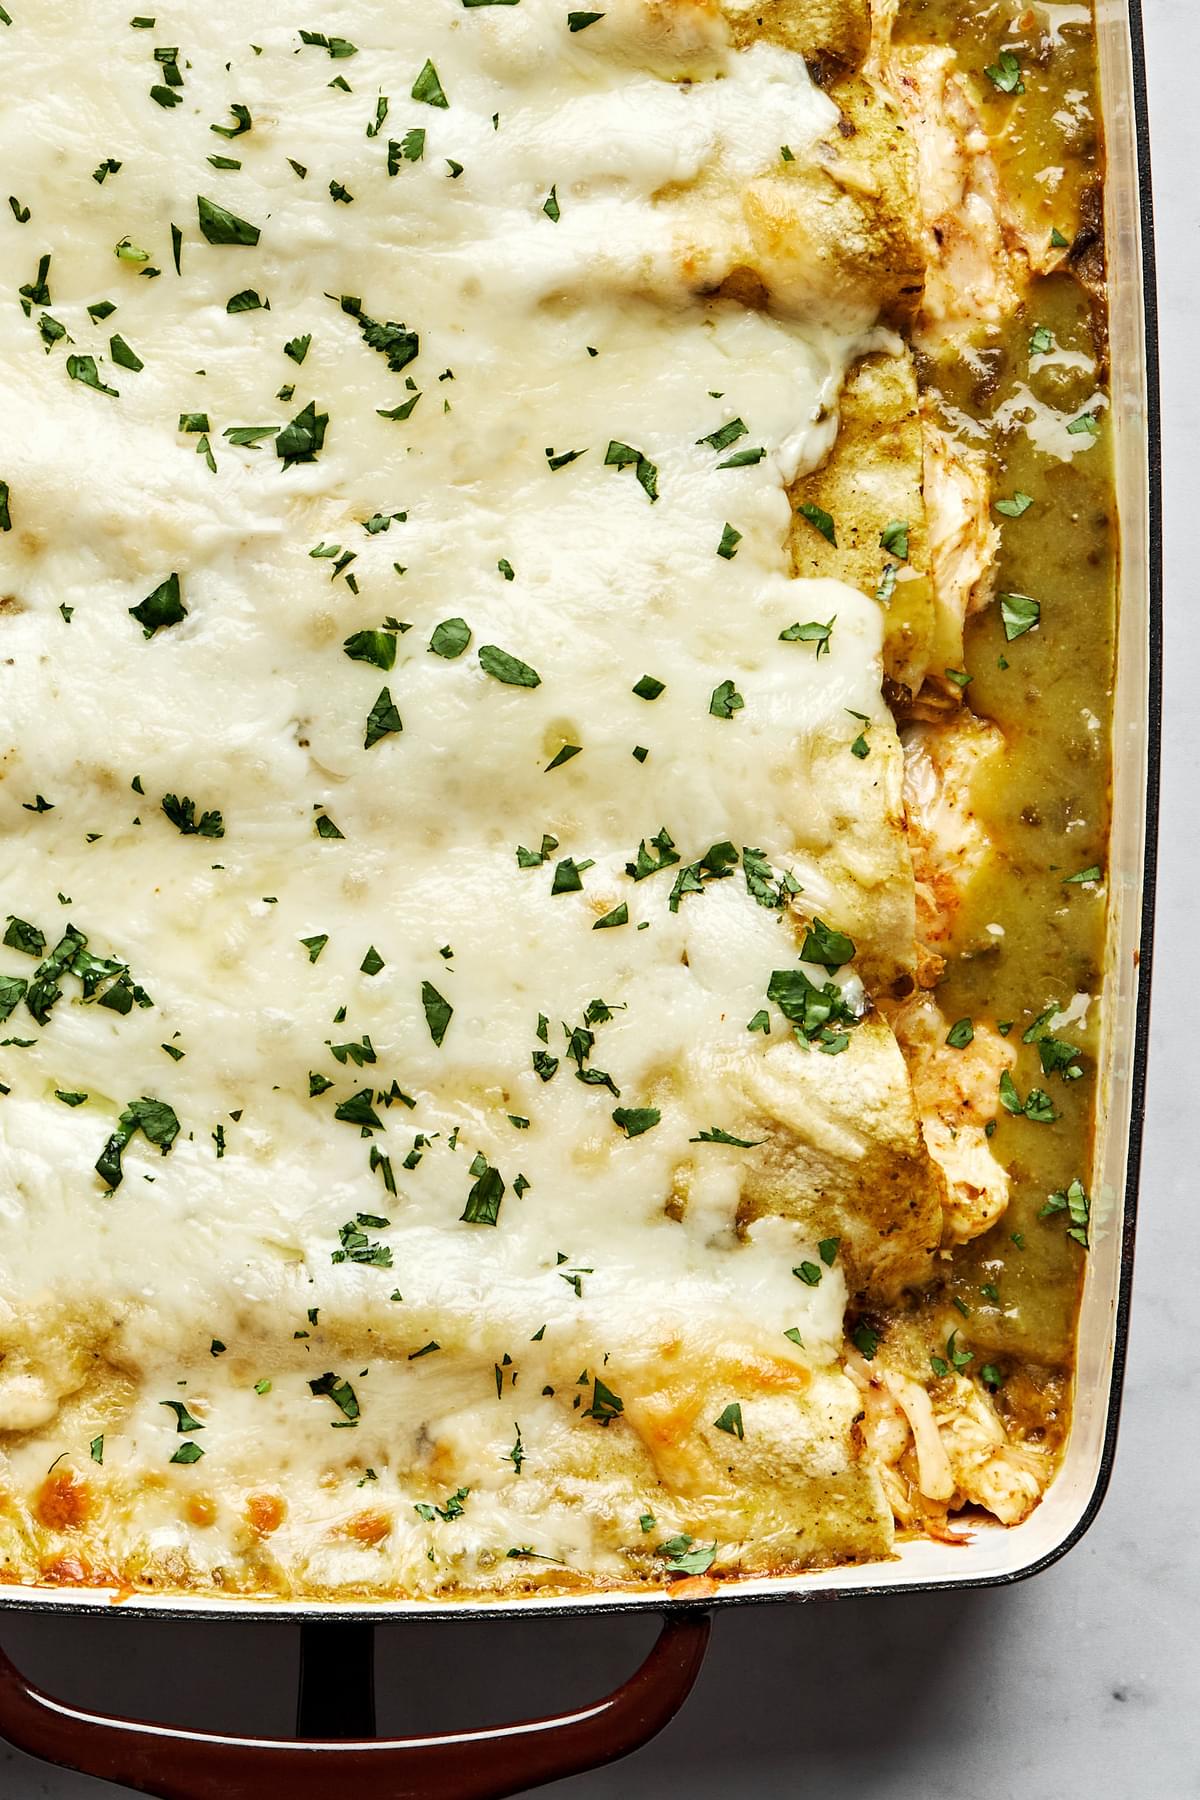 homemade green chicken enchiladas in a casserole dish made with chicken, cheese, sour cream and taco seasoning